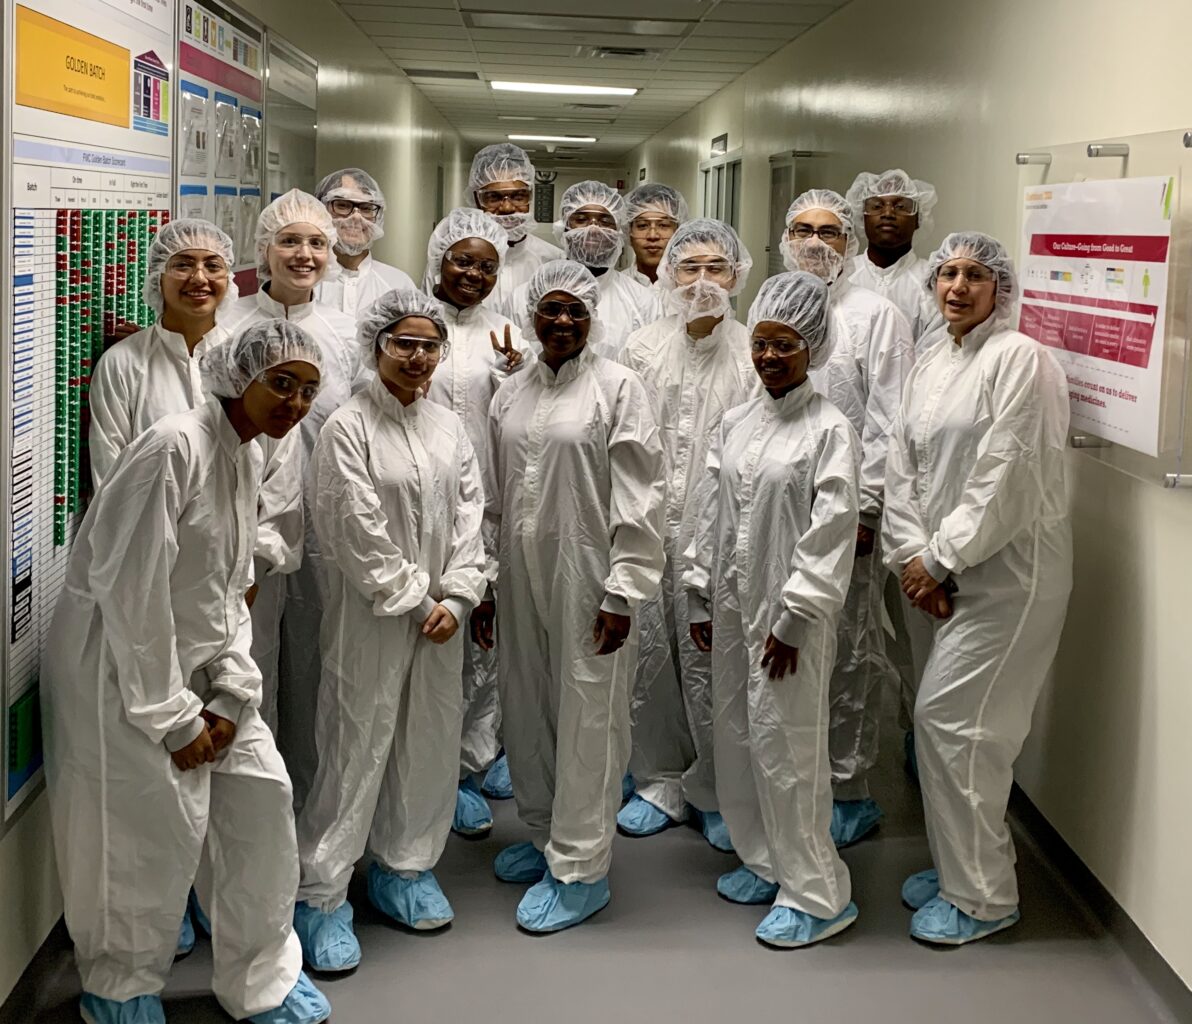 Students in lab gear at a biotech company